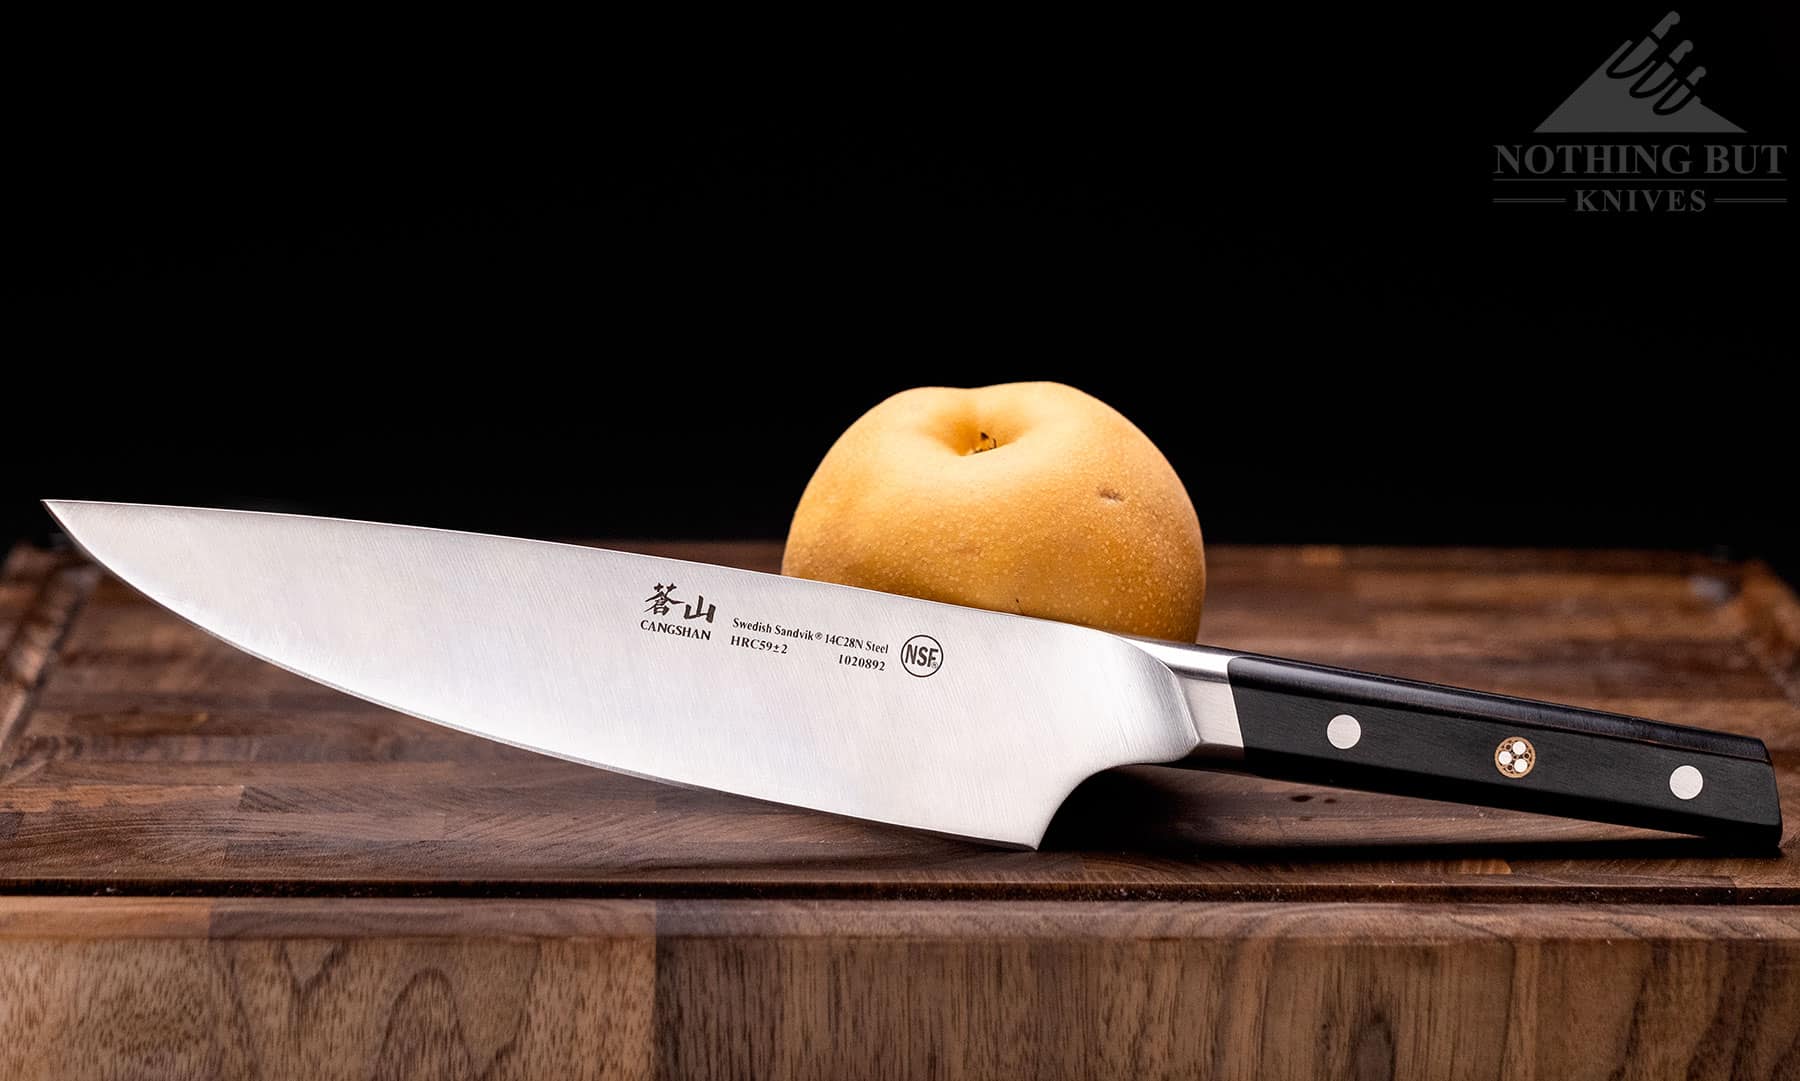 https://www.nothingbutknives.com/wp-content/uploads/2021/12/Cangshan-TC-8-Inch-Chef-Knife-Review.jpg